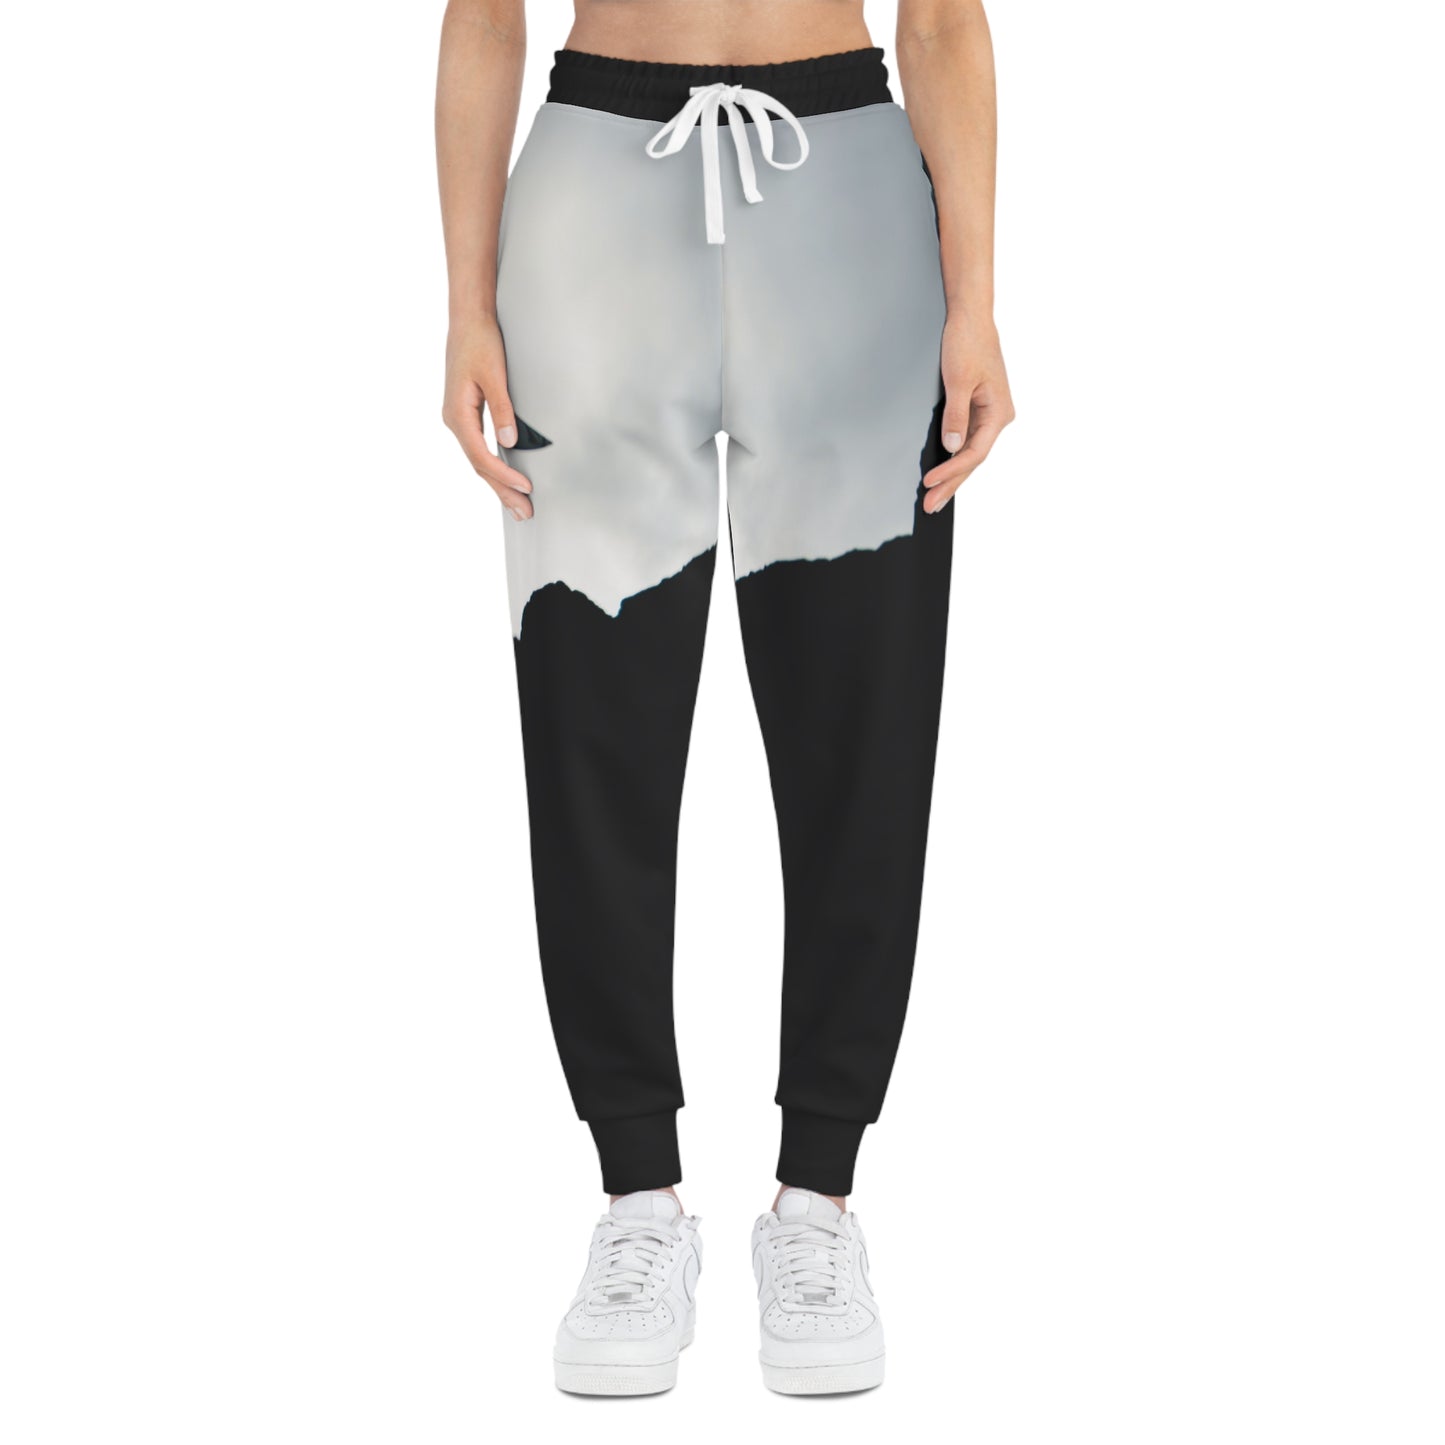 Athletic Joggers For Women | The Surfer